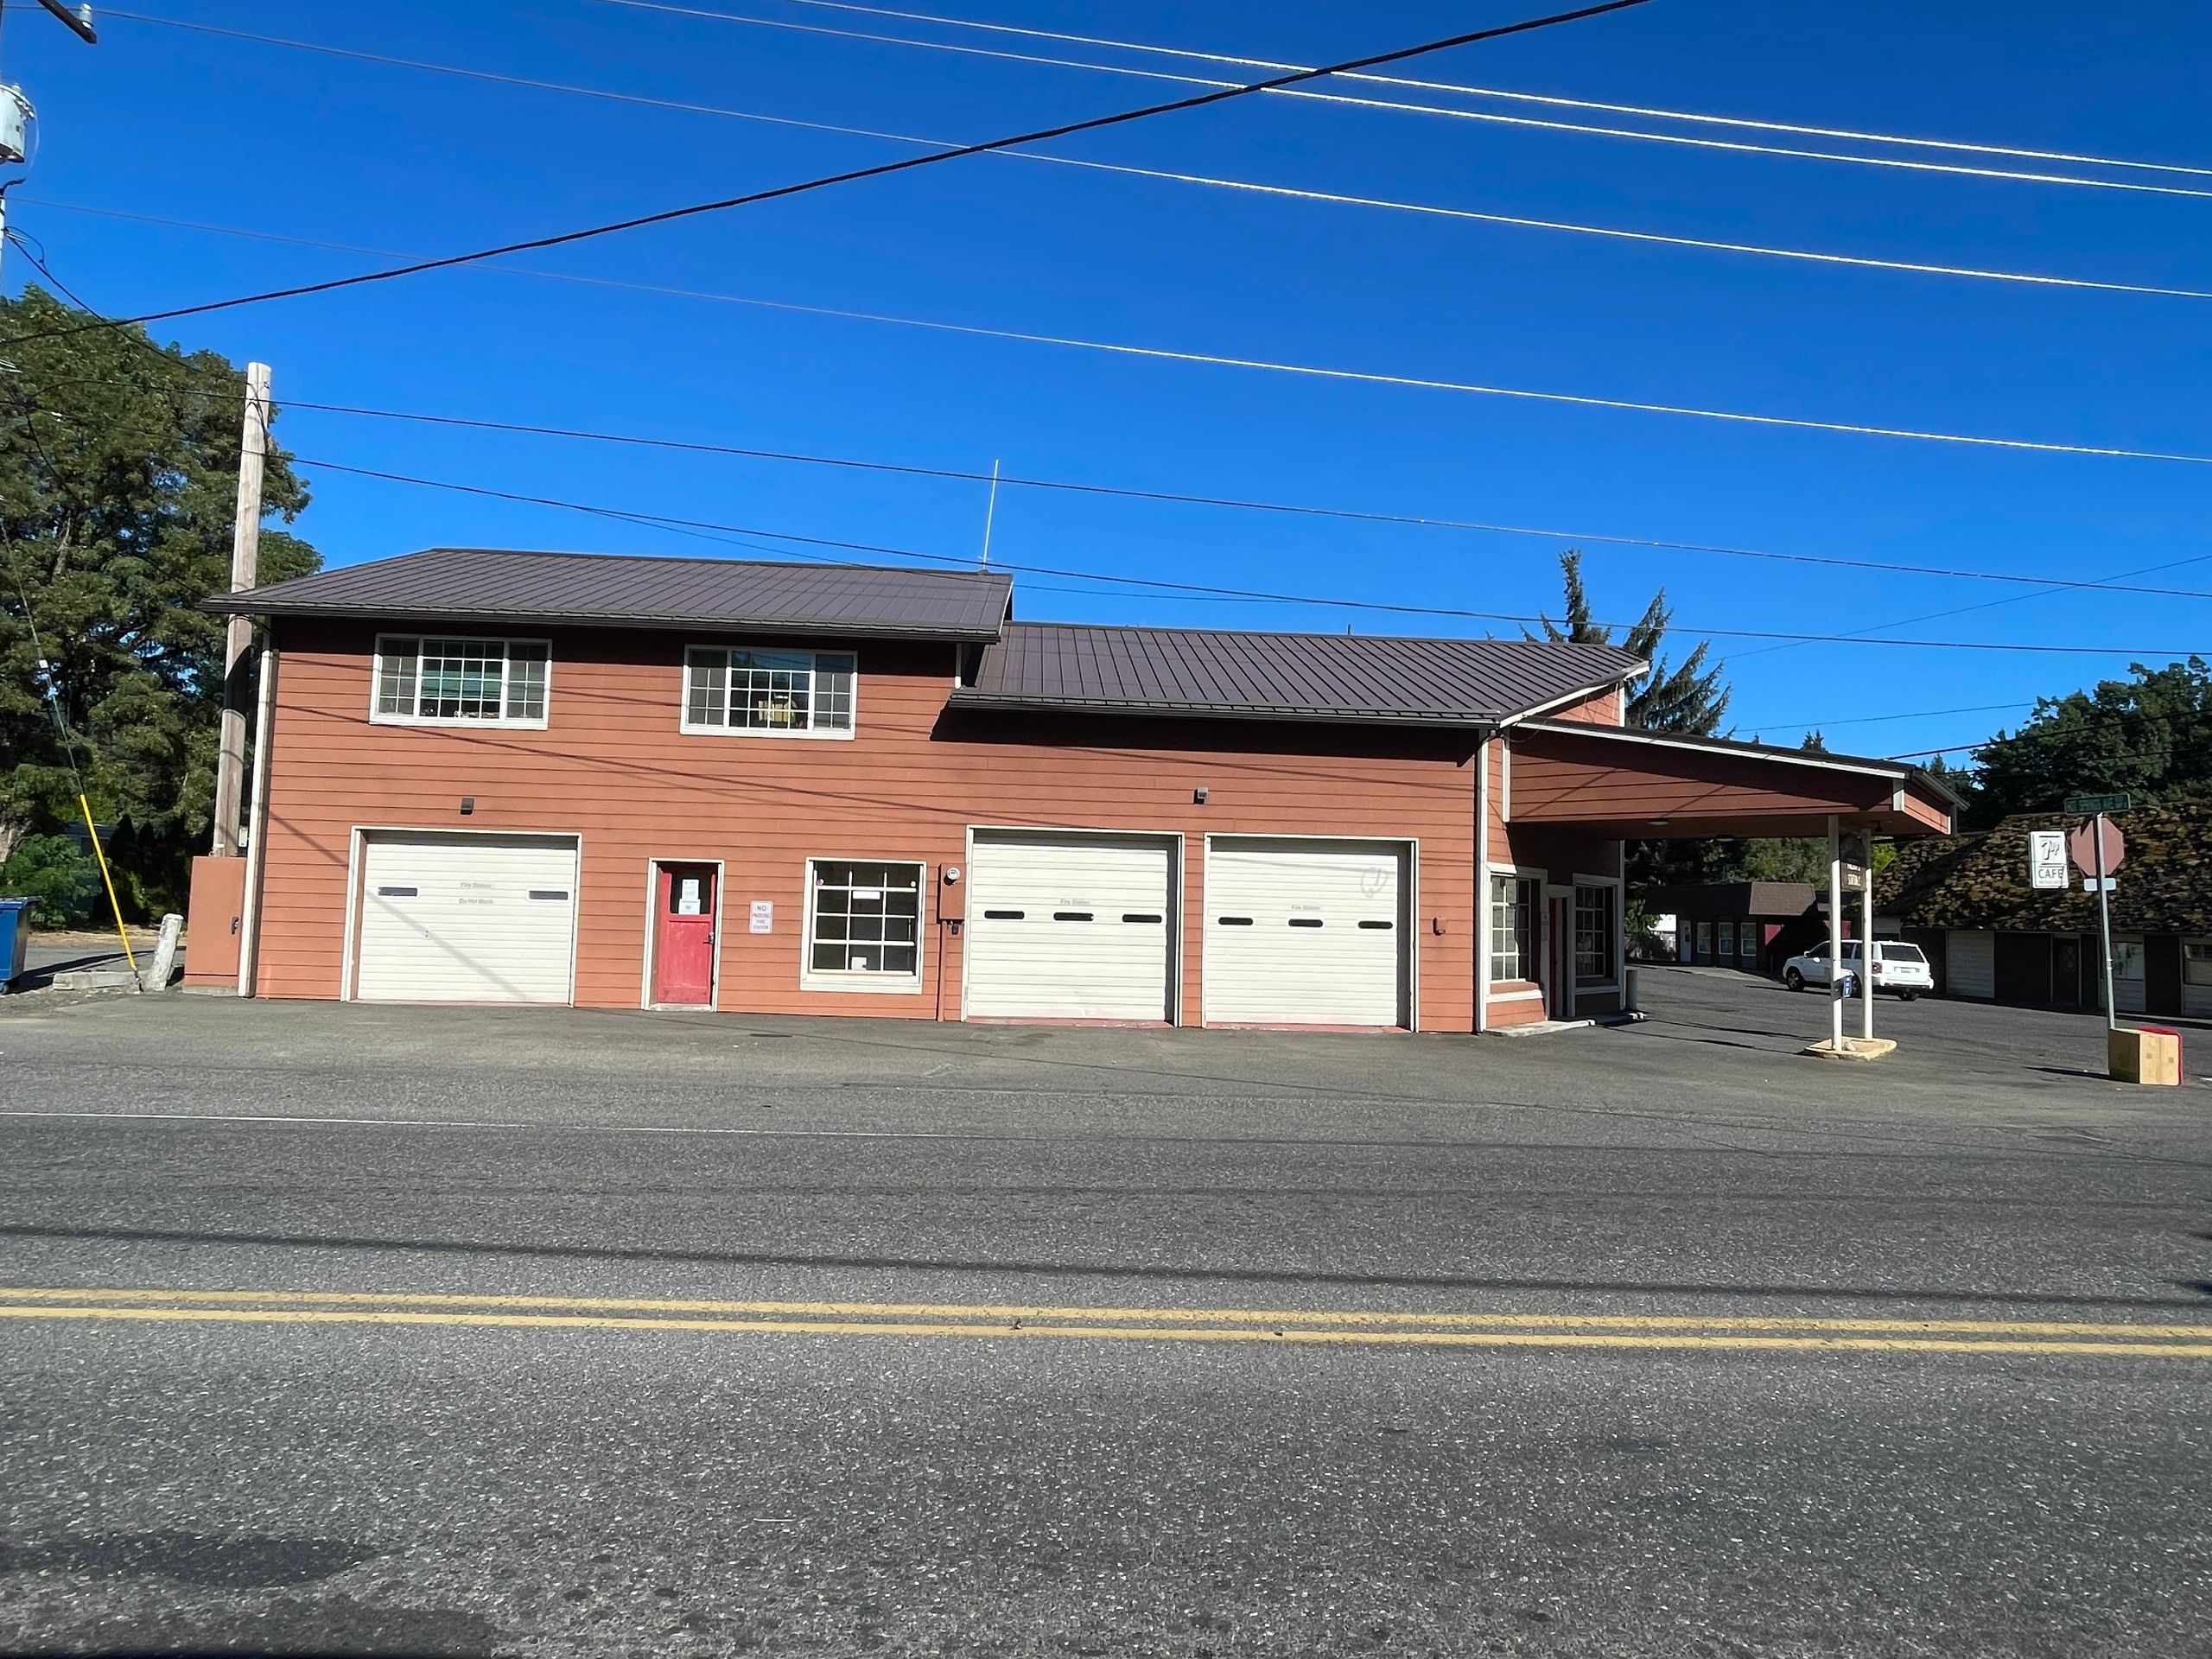 Skamania County Fire District 1 Station 1